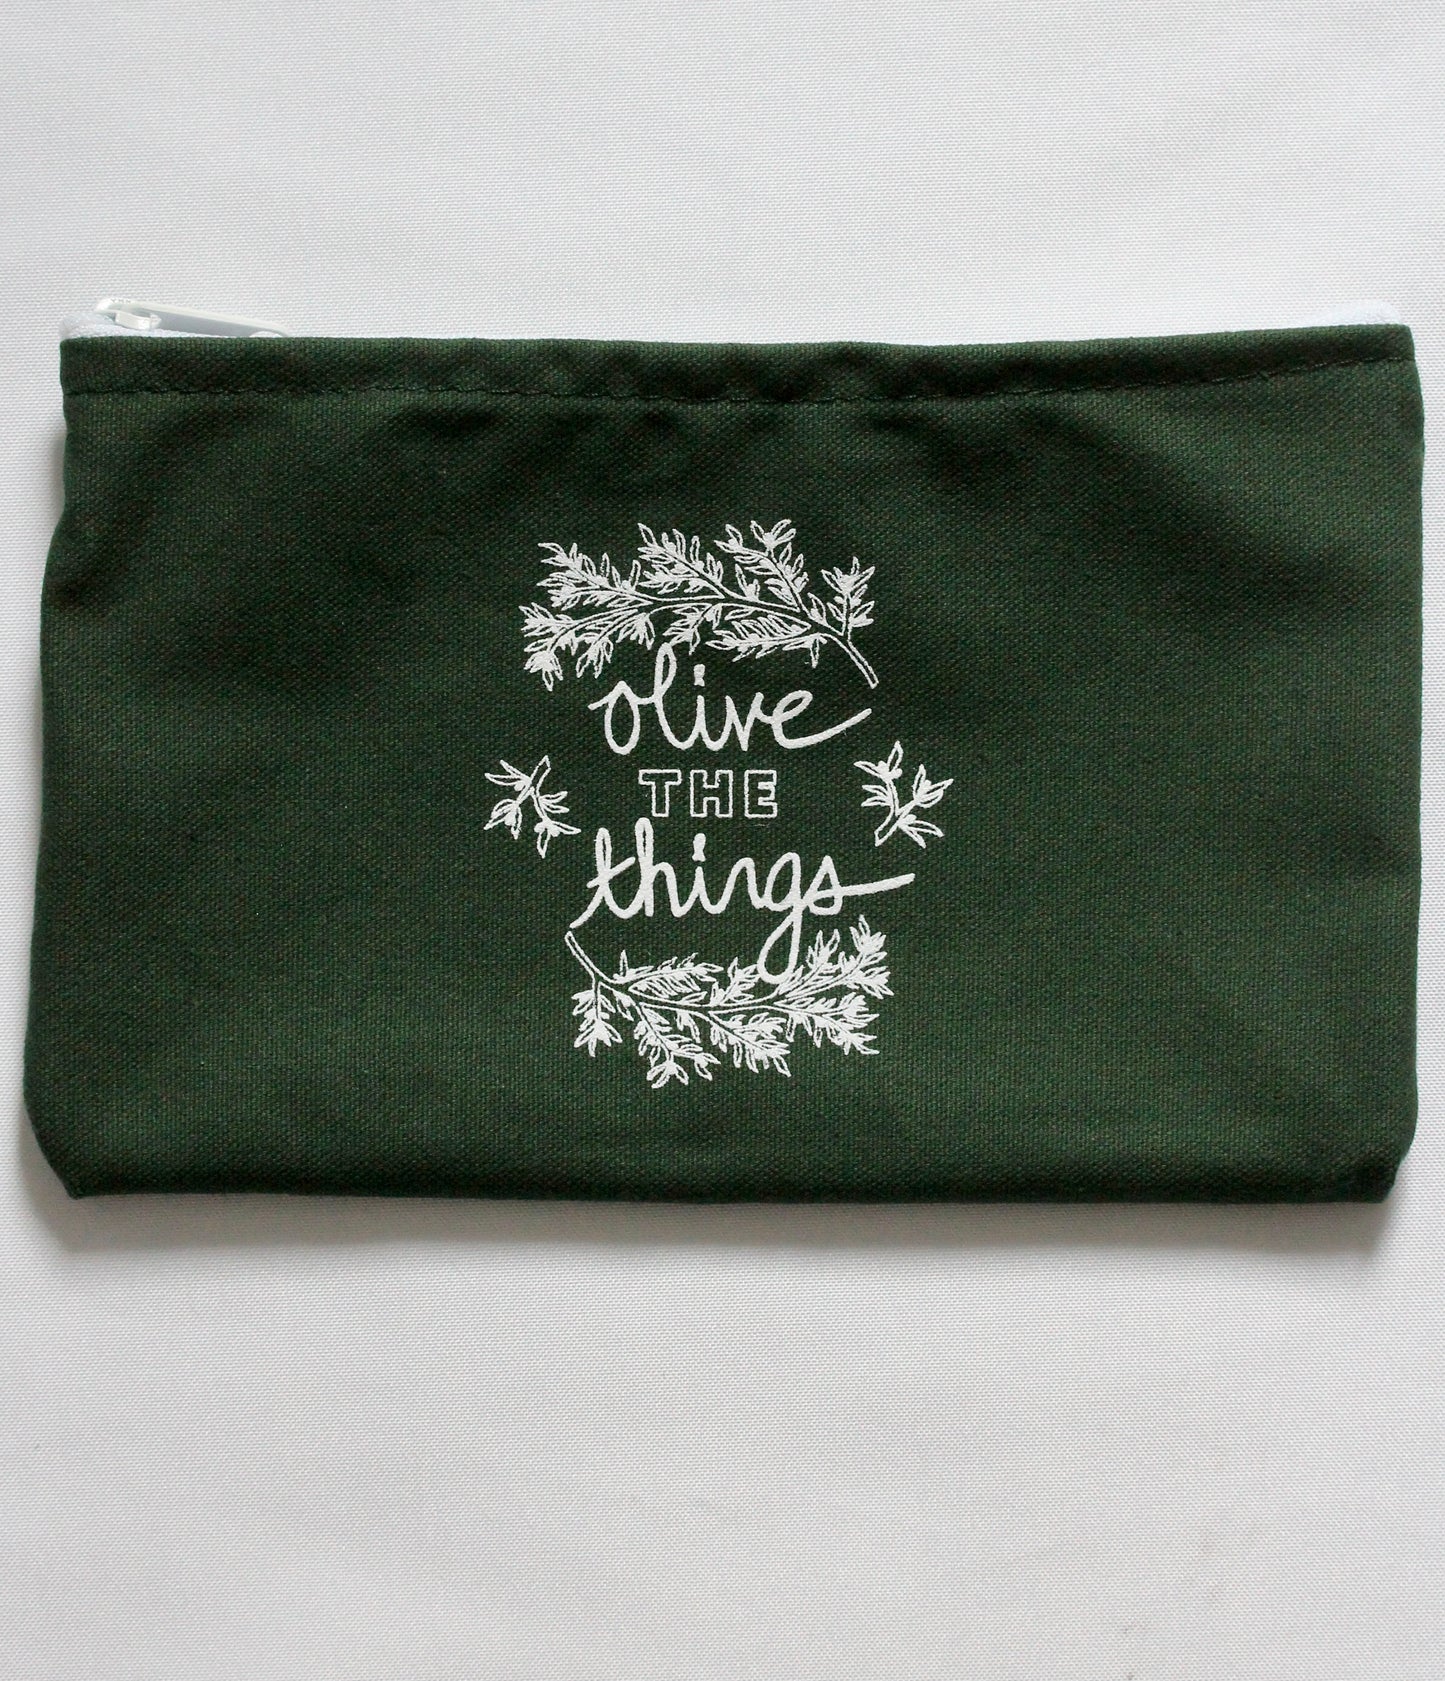 Olive the Things Zipper Pouch